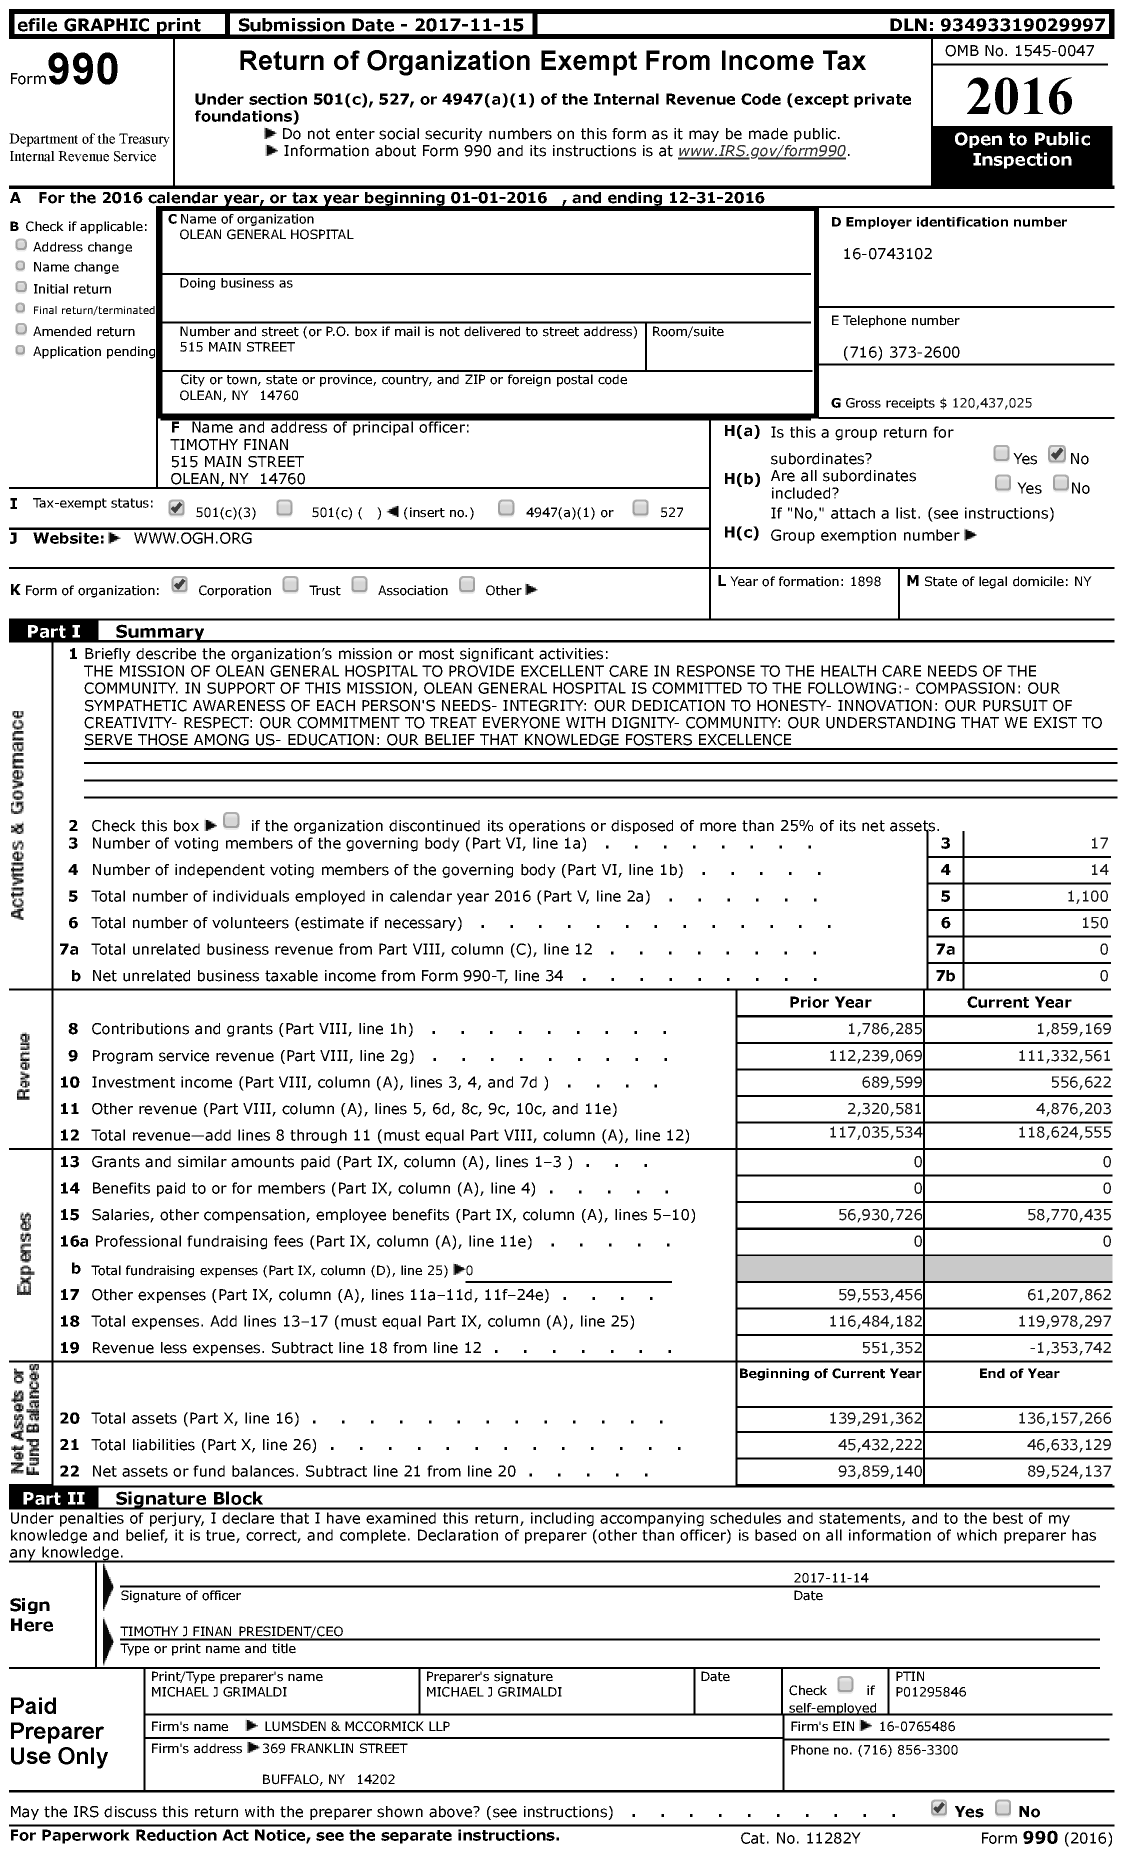 Image of first page of 2016 Form 990 for Olean General Hospital (OGH)